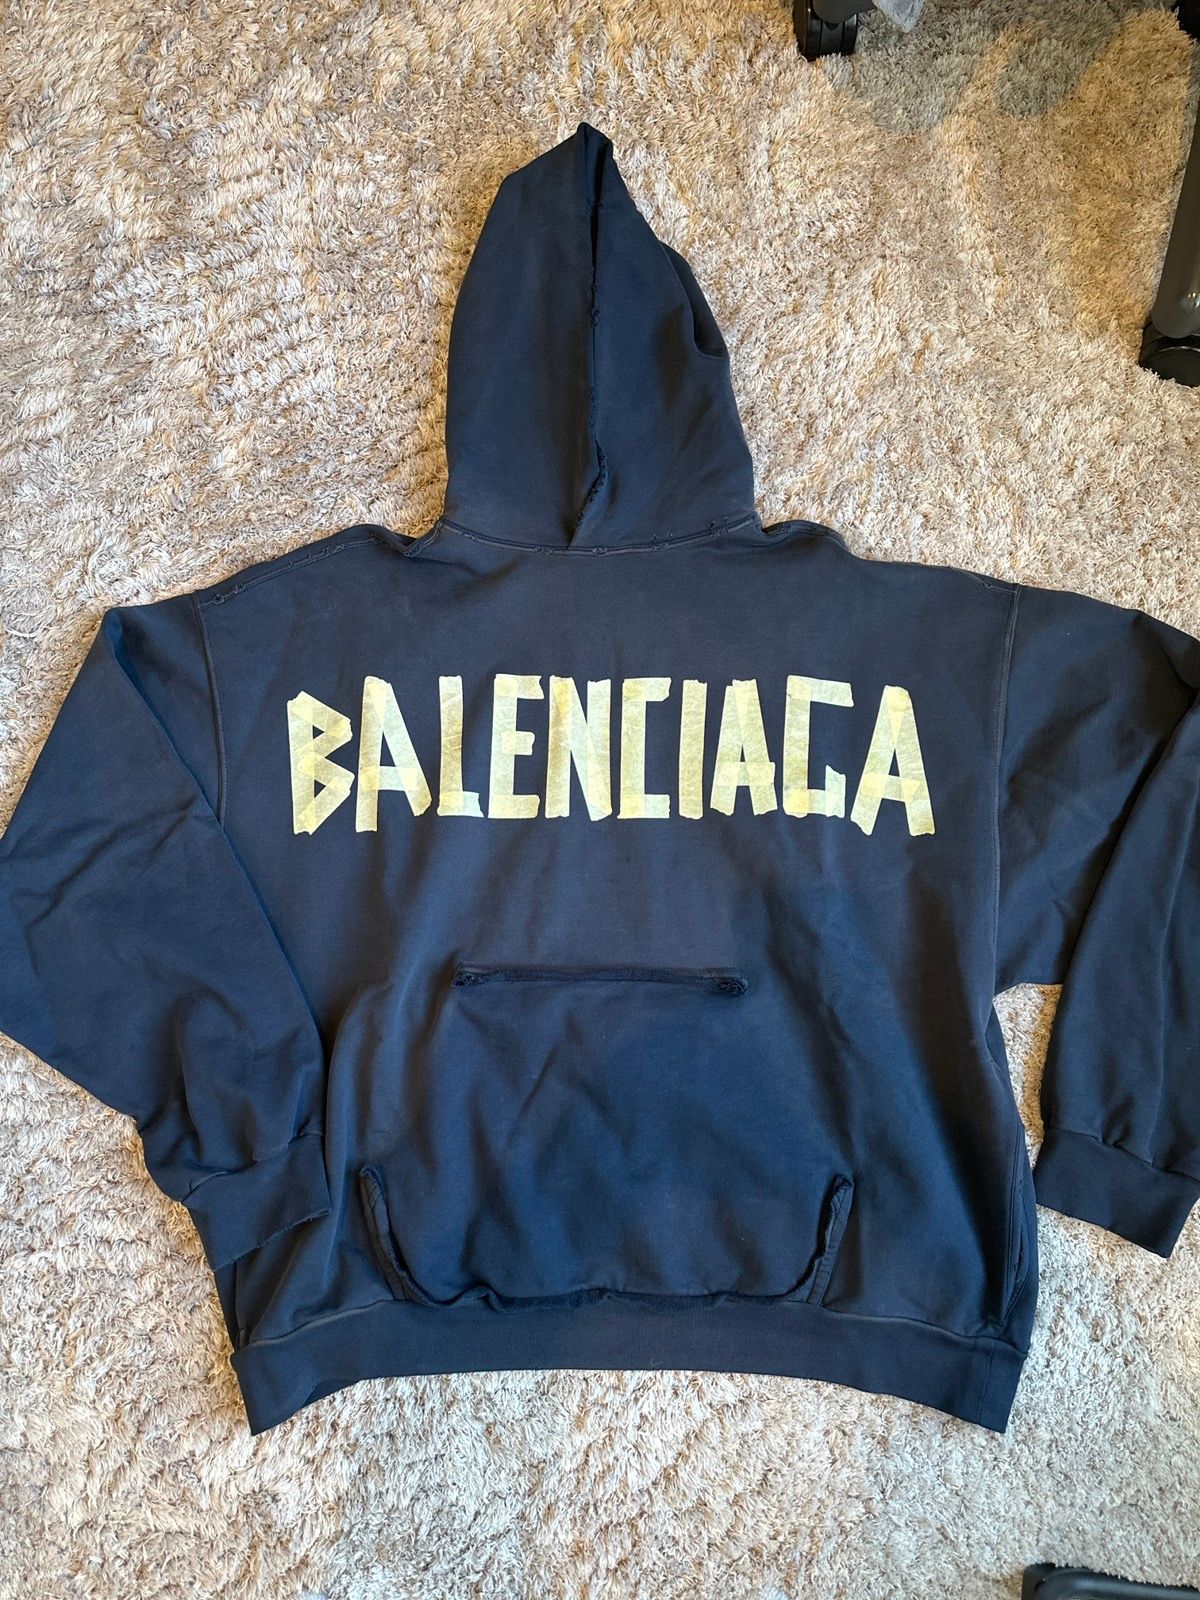 Pre-owned Balenciaga Tape Type Hoodie Black Navy Ripped Up